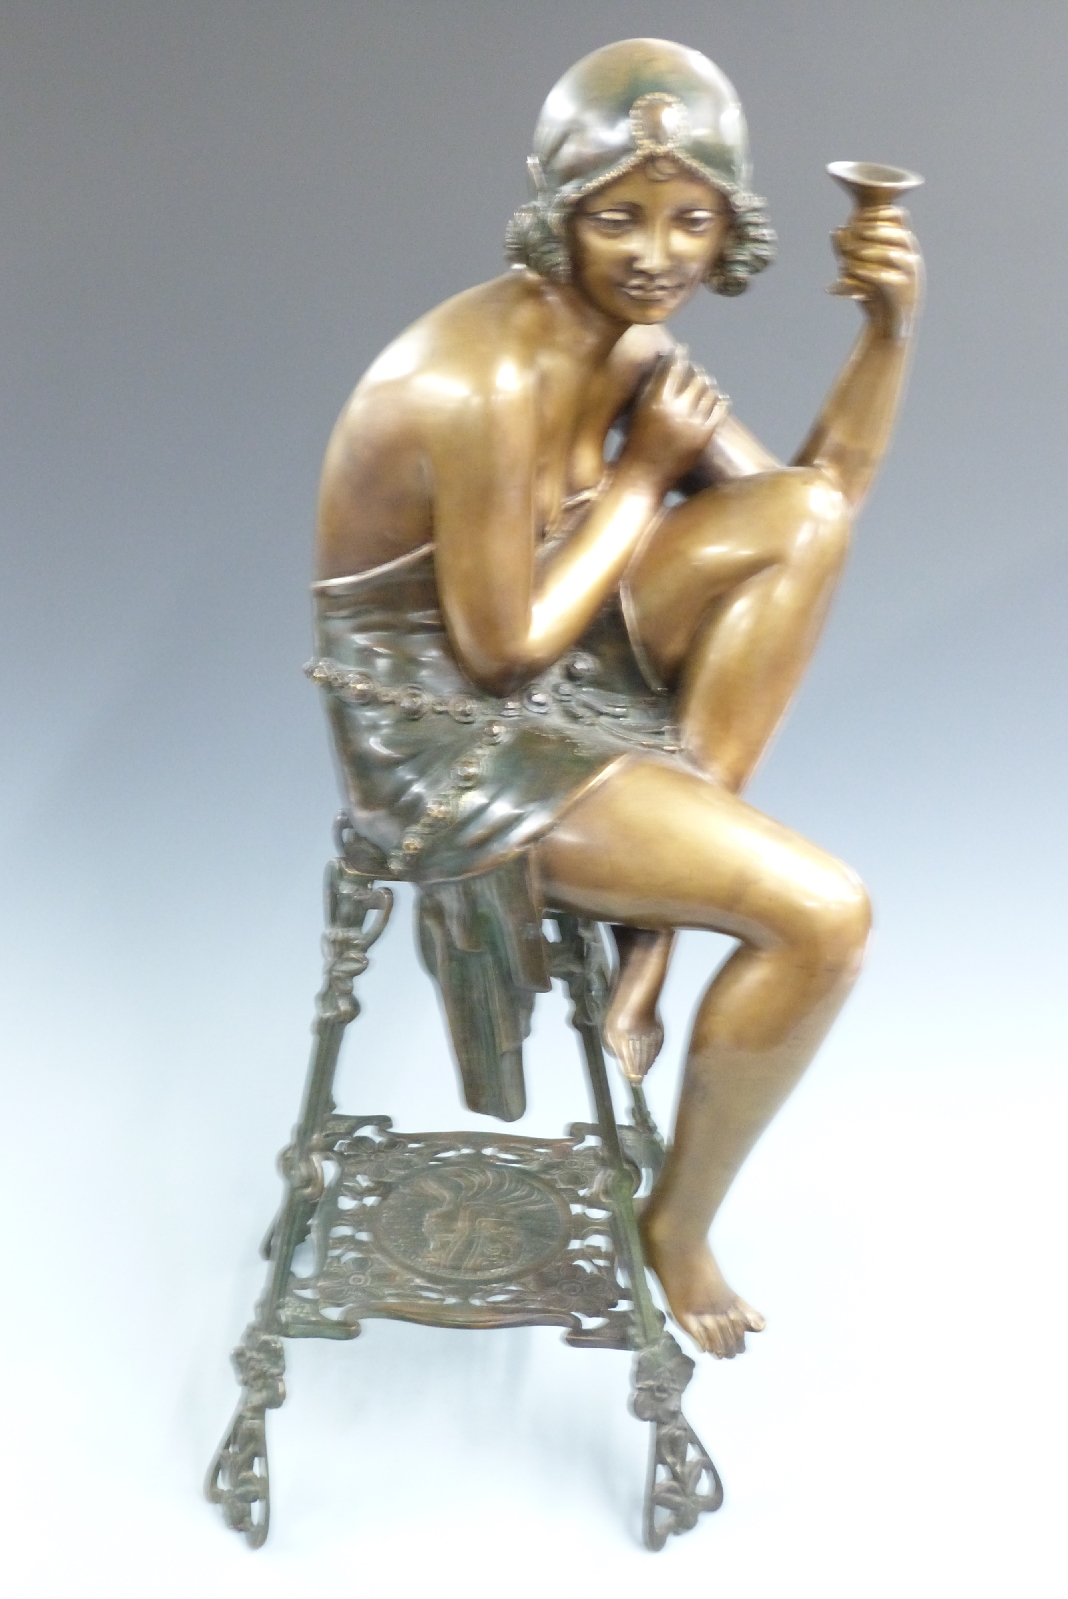 Art Deco style bronze/bronzed flapper girl with champagne glass seated on an ornate Art Nouveau